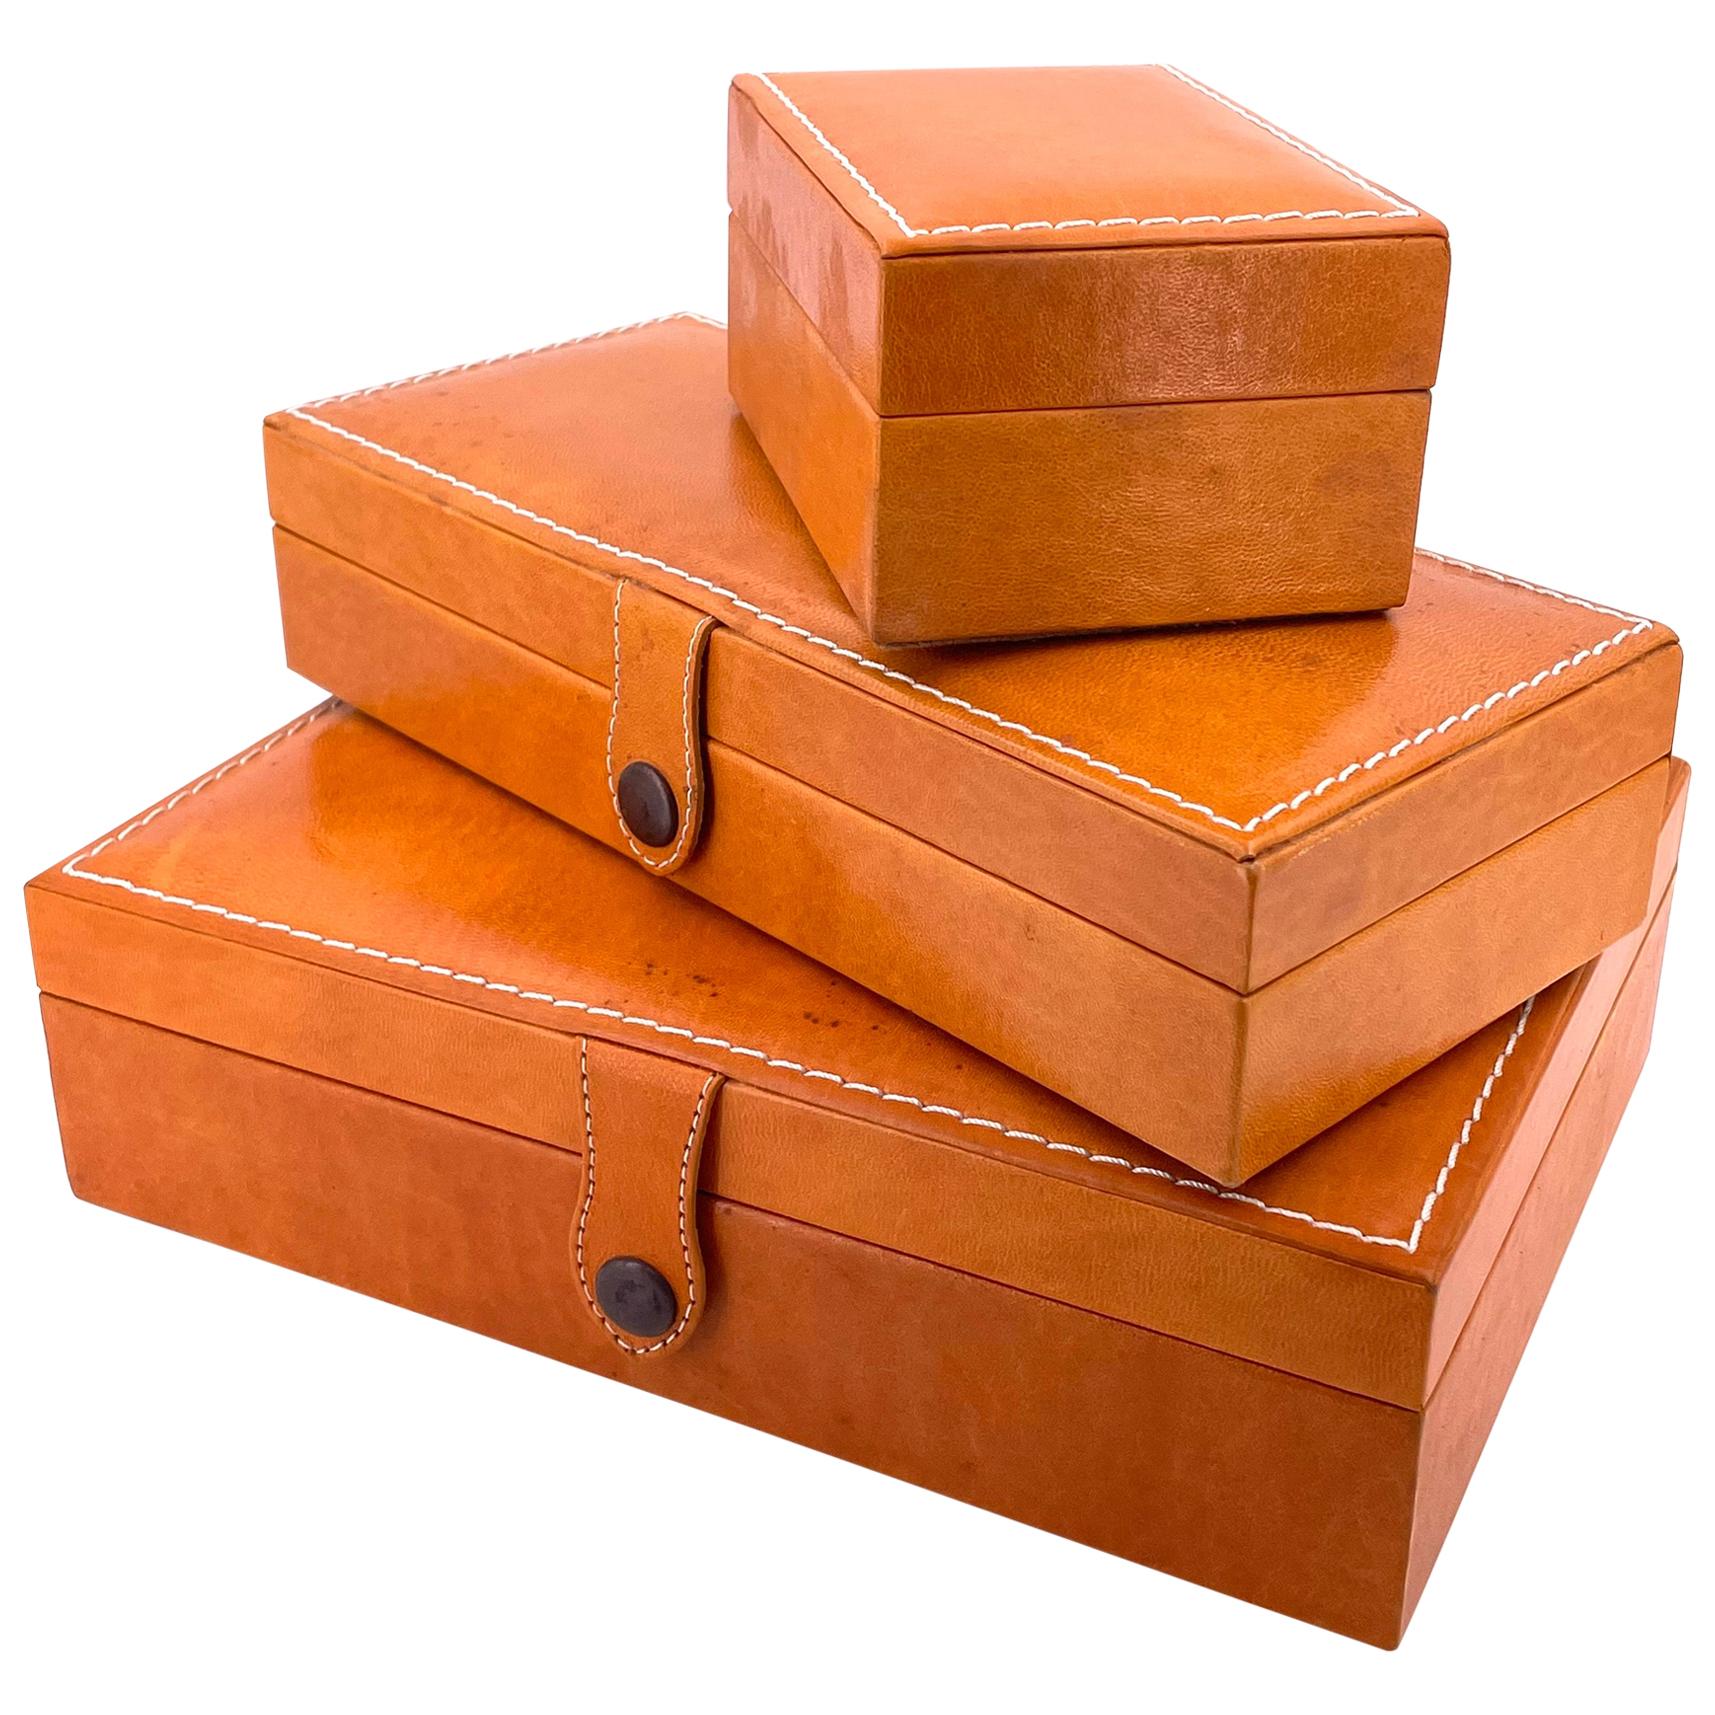 Elegant Set of 3 Leather Handstitched Jewelry Boxes